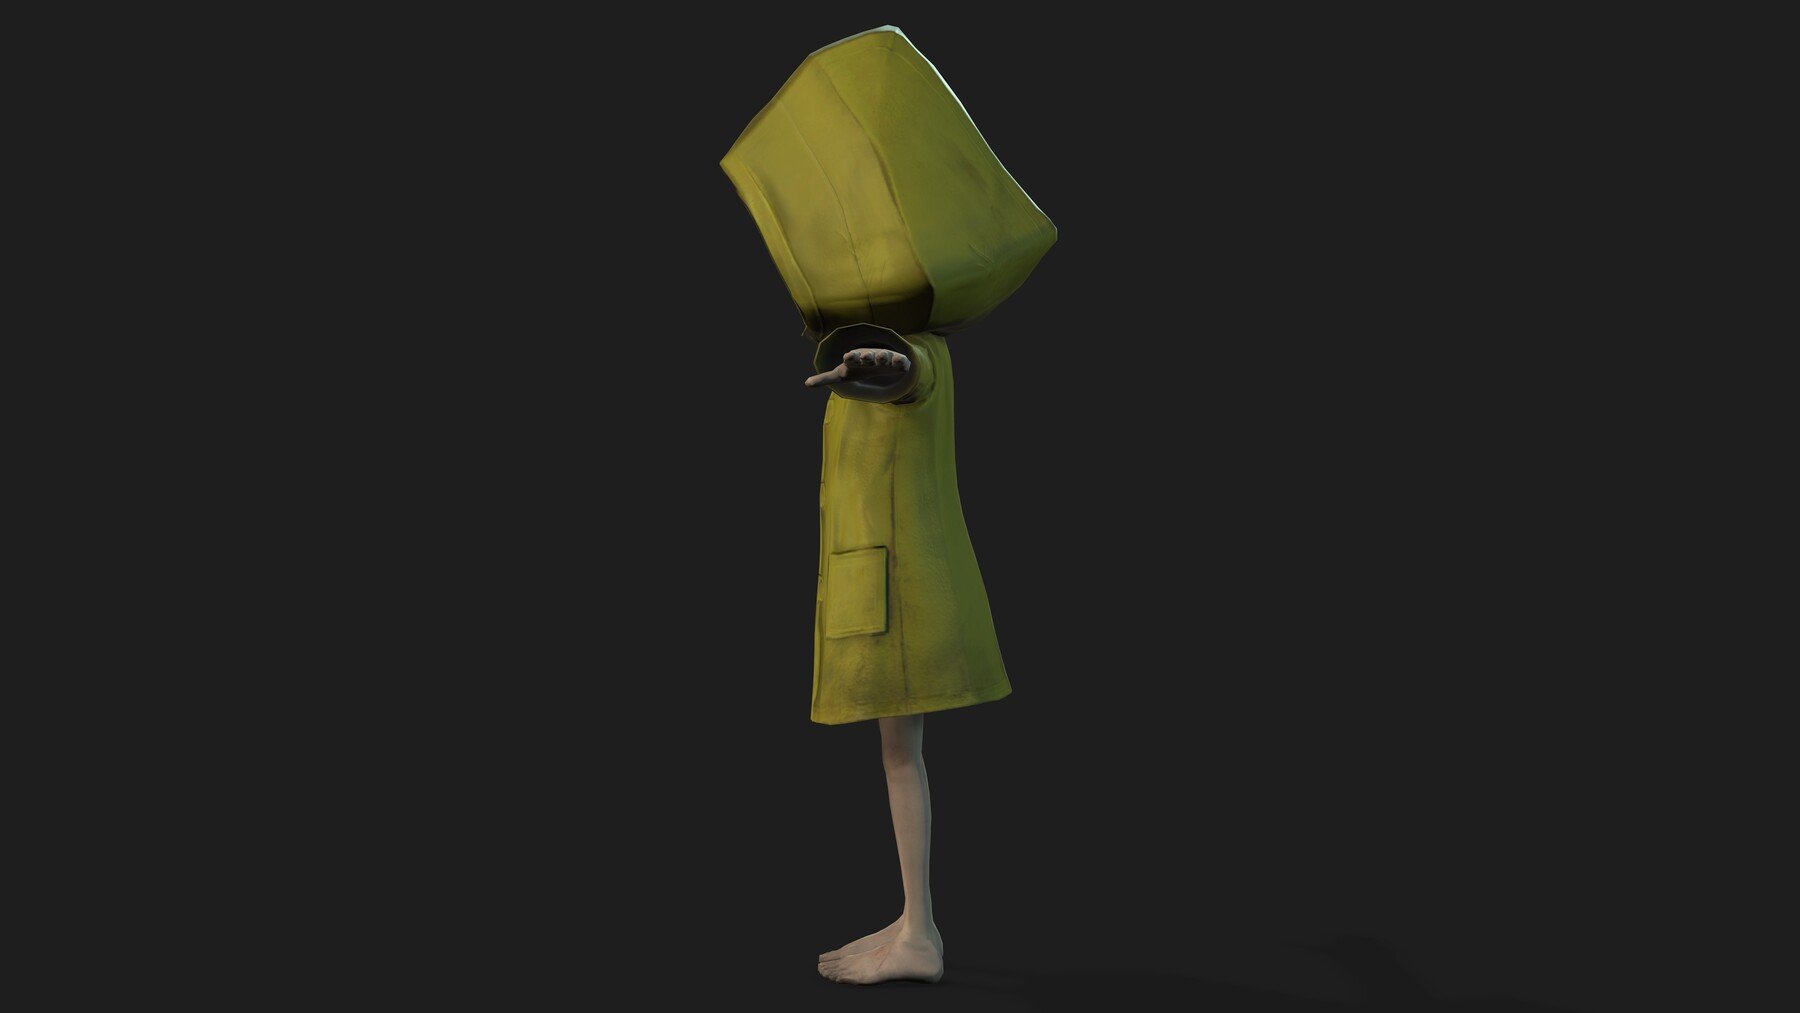 seven from little nightmares